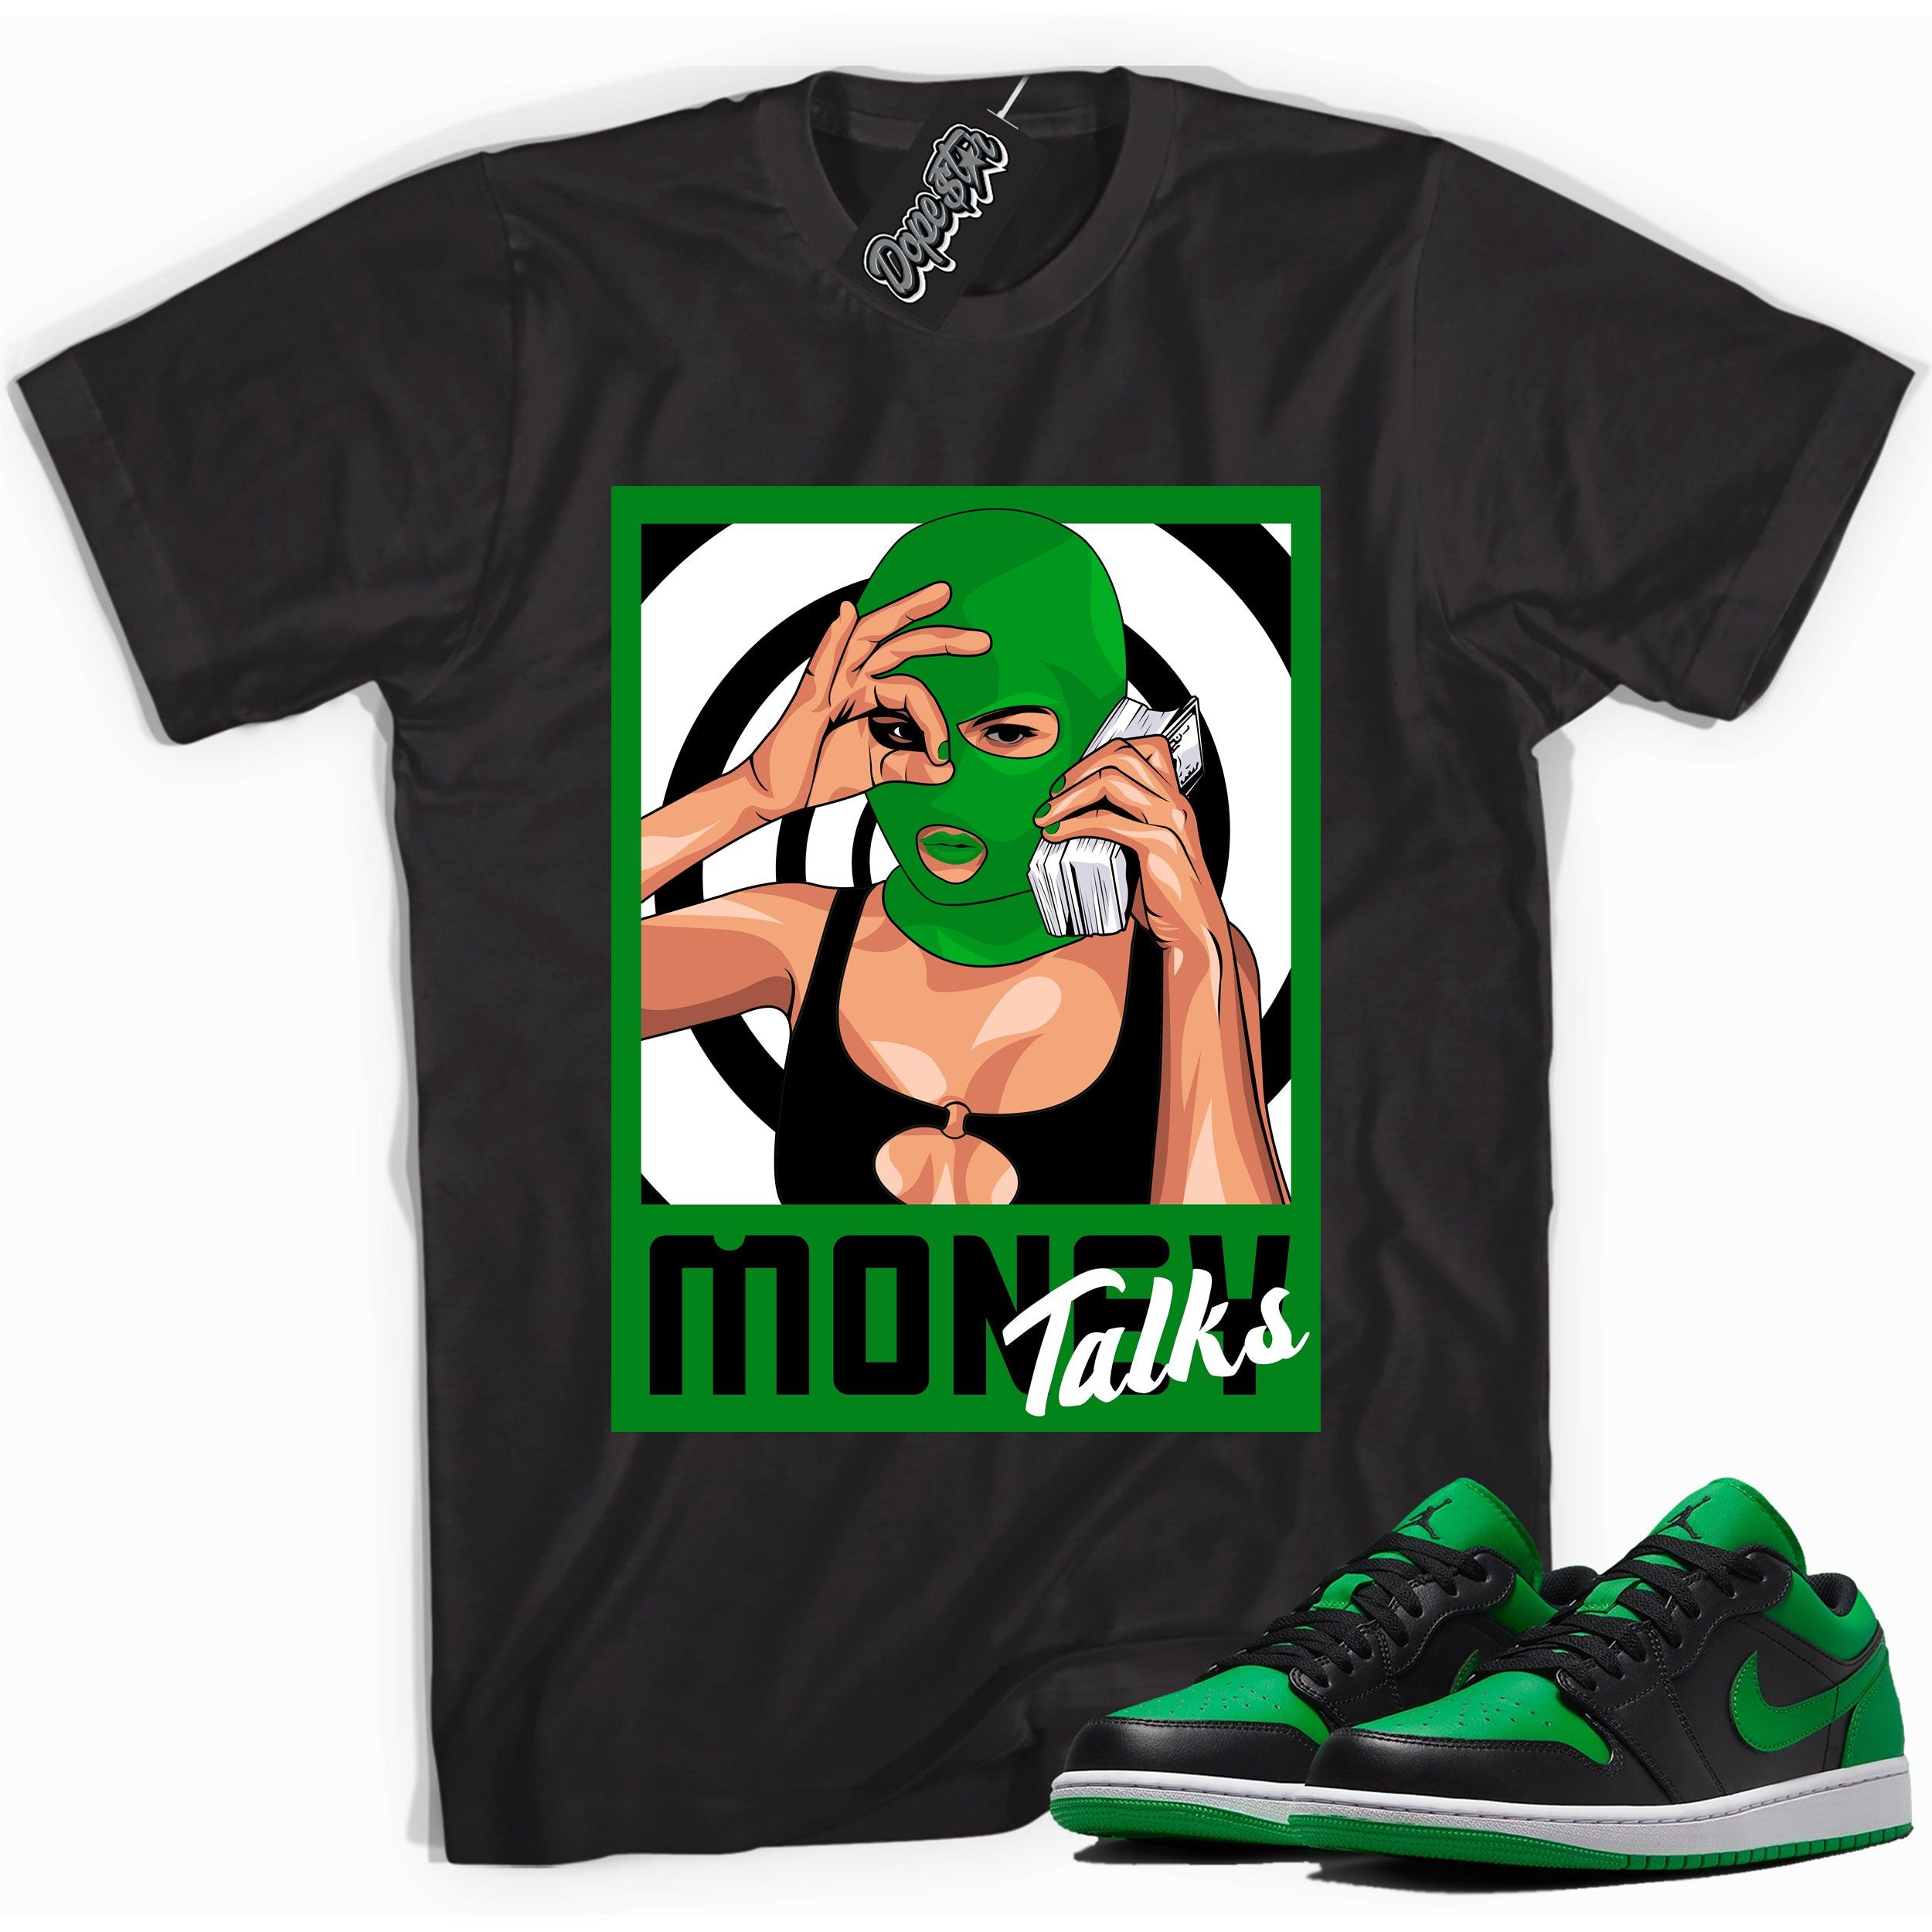 Cool black graphic tee with 'money talks' print, that perfectly matches Air Jordan 1 Low Lucky Green sneakers